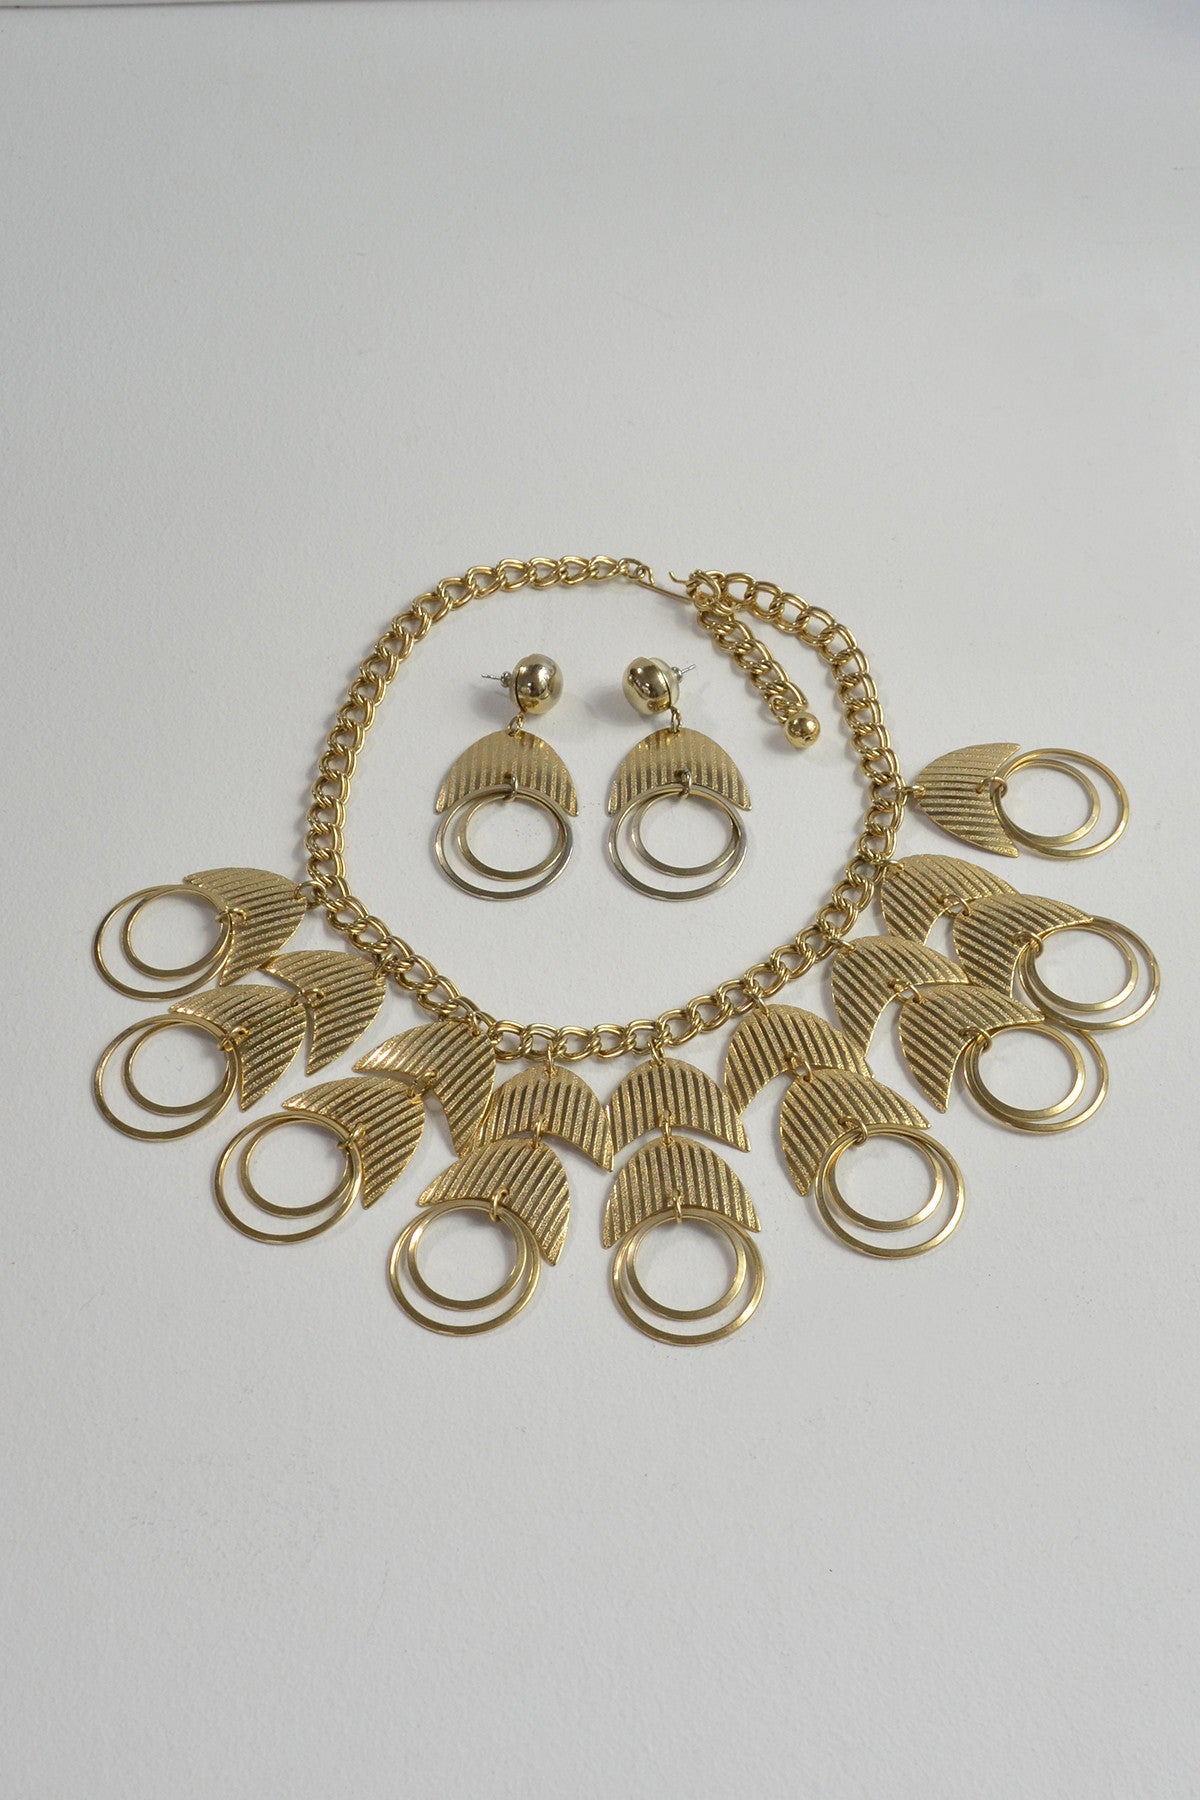 Vintage 1970s Gold Tone Crescent Moon and Open Rings Necklace and Earrings